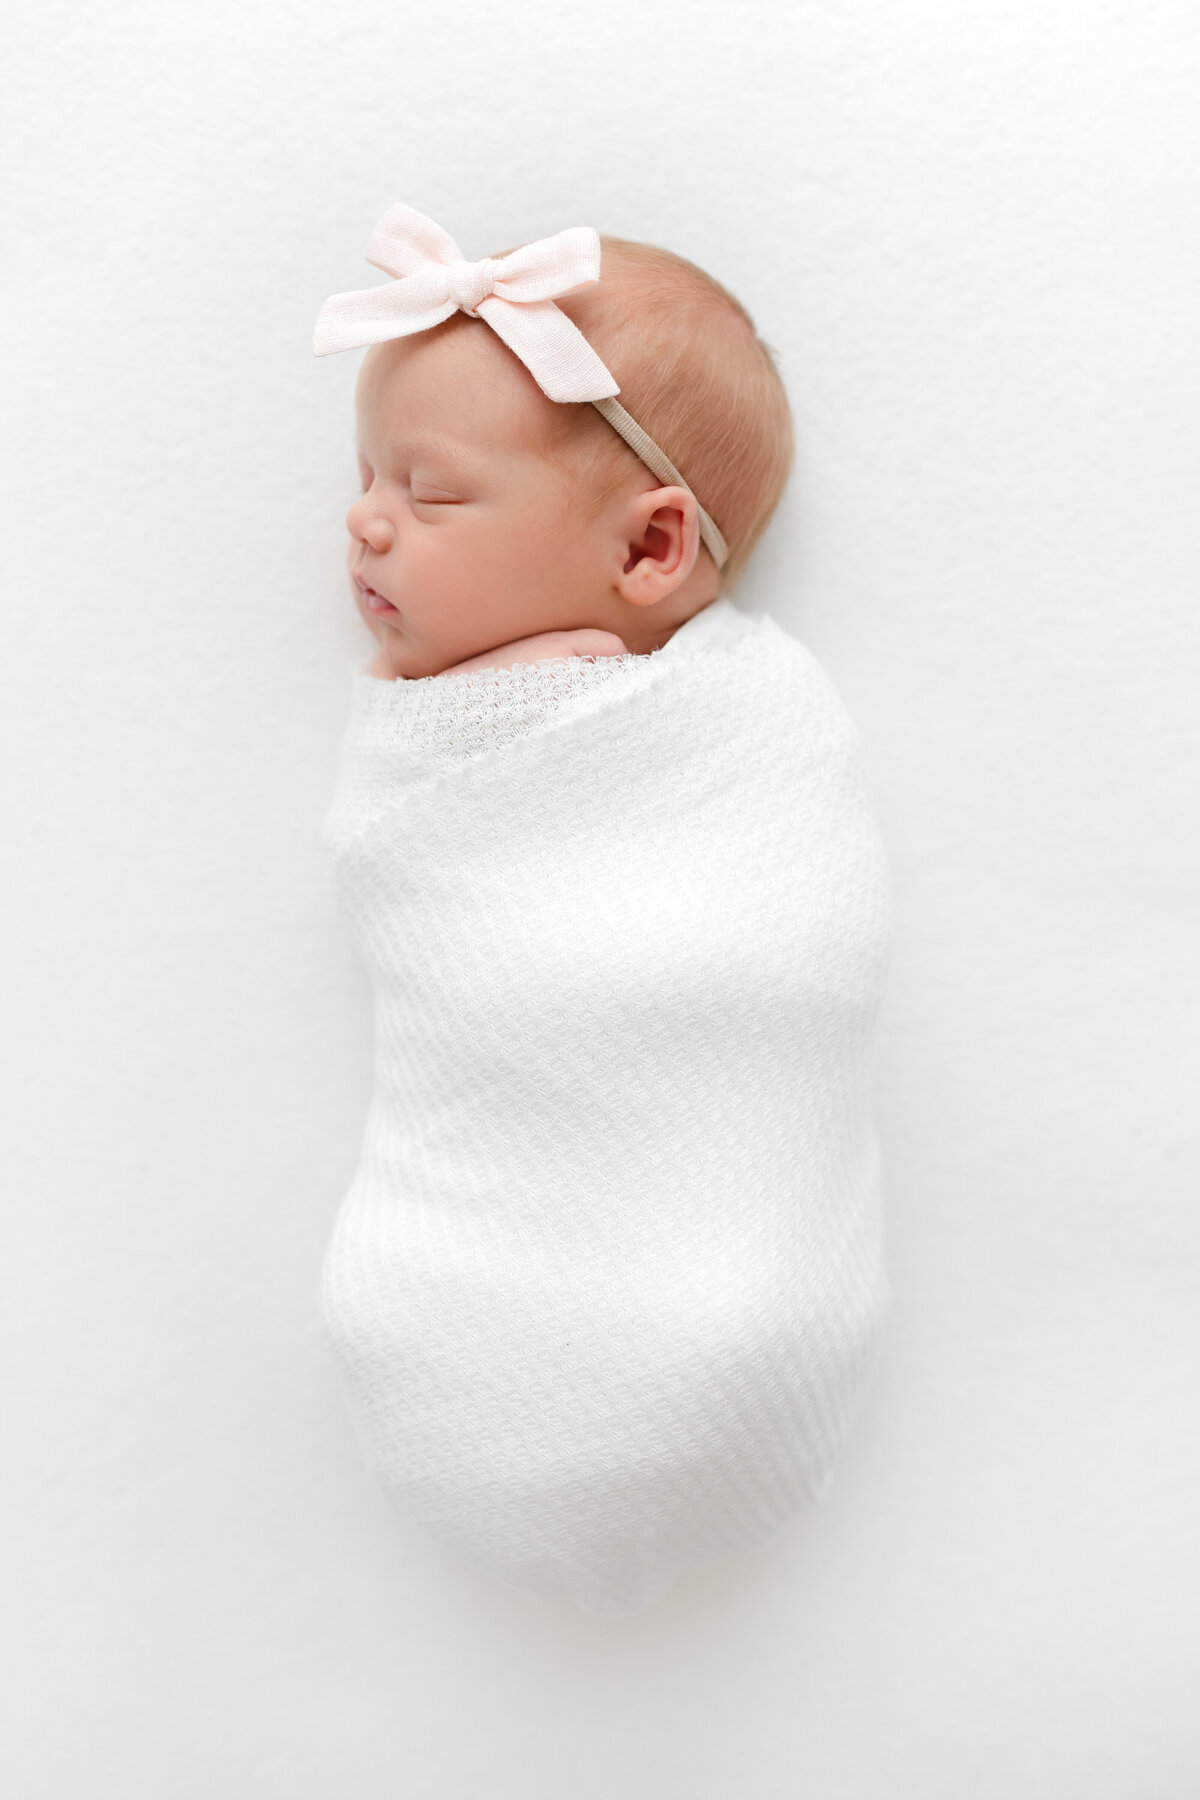 A DC Newborn Photography photo of a baby girl swaddled with a pink bow sleeping on a white blanket